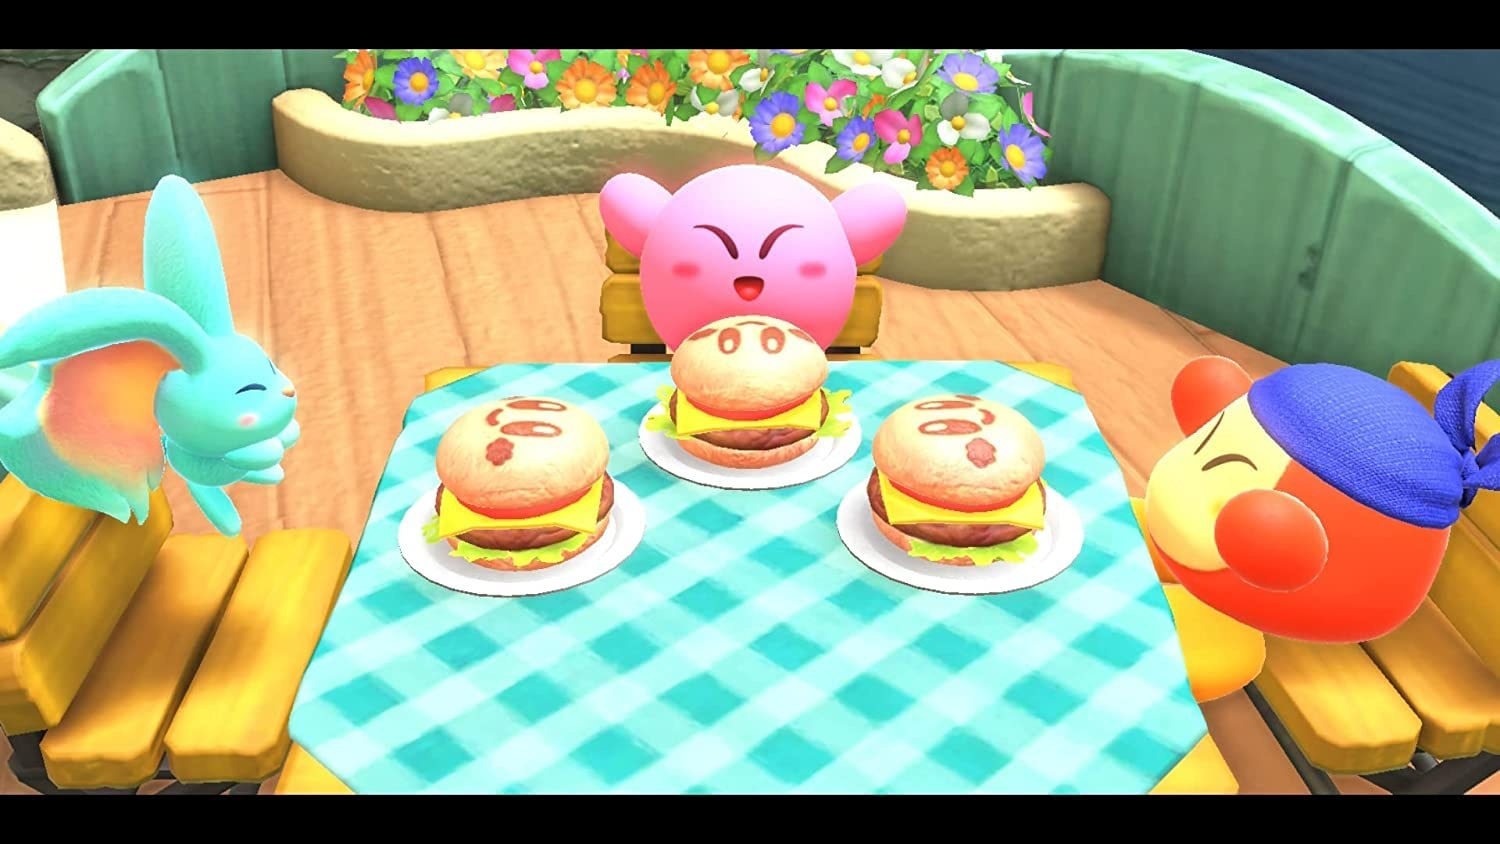 Kirby and friends sitting at a dinner table